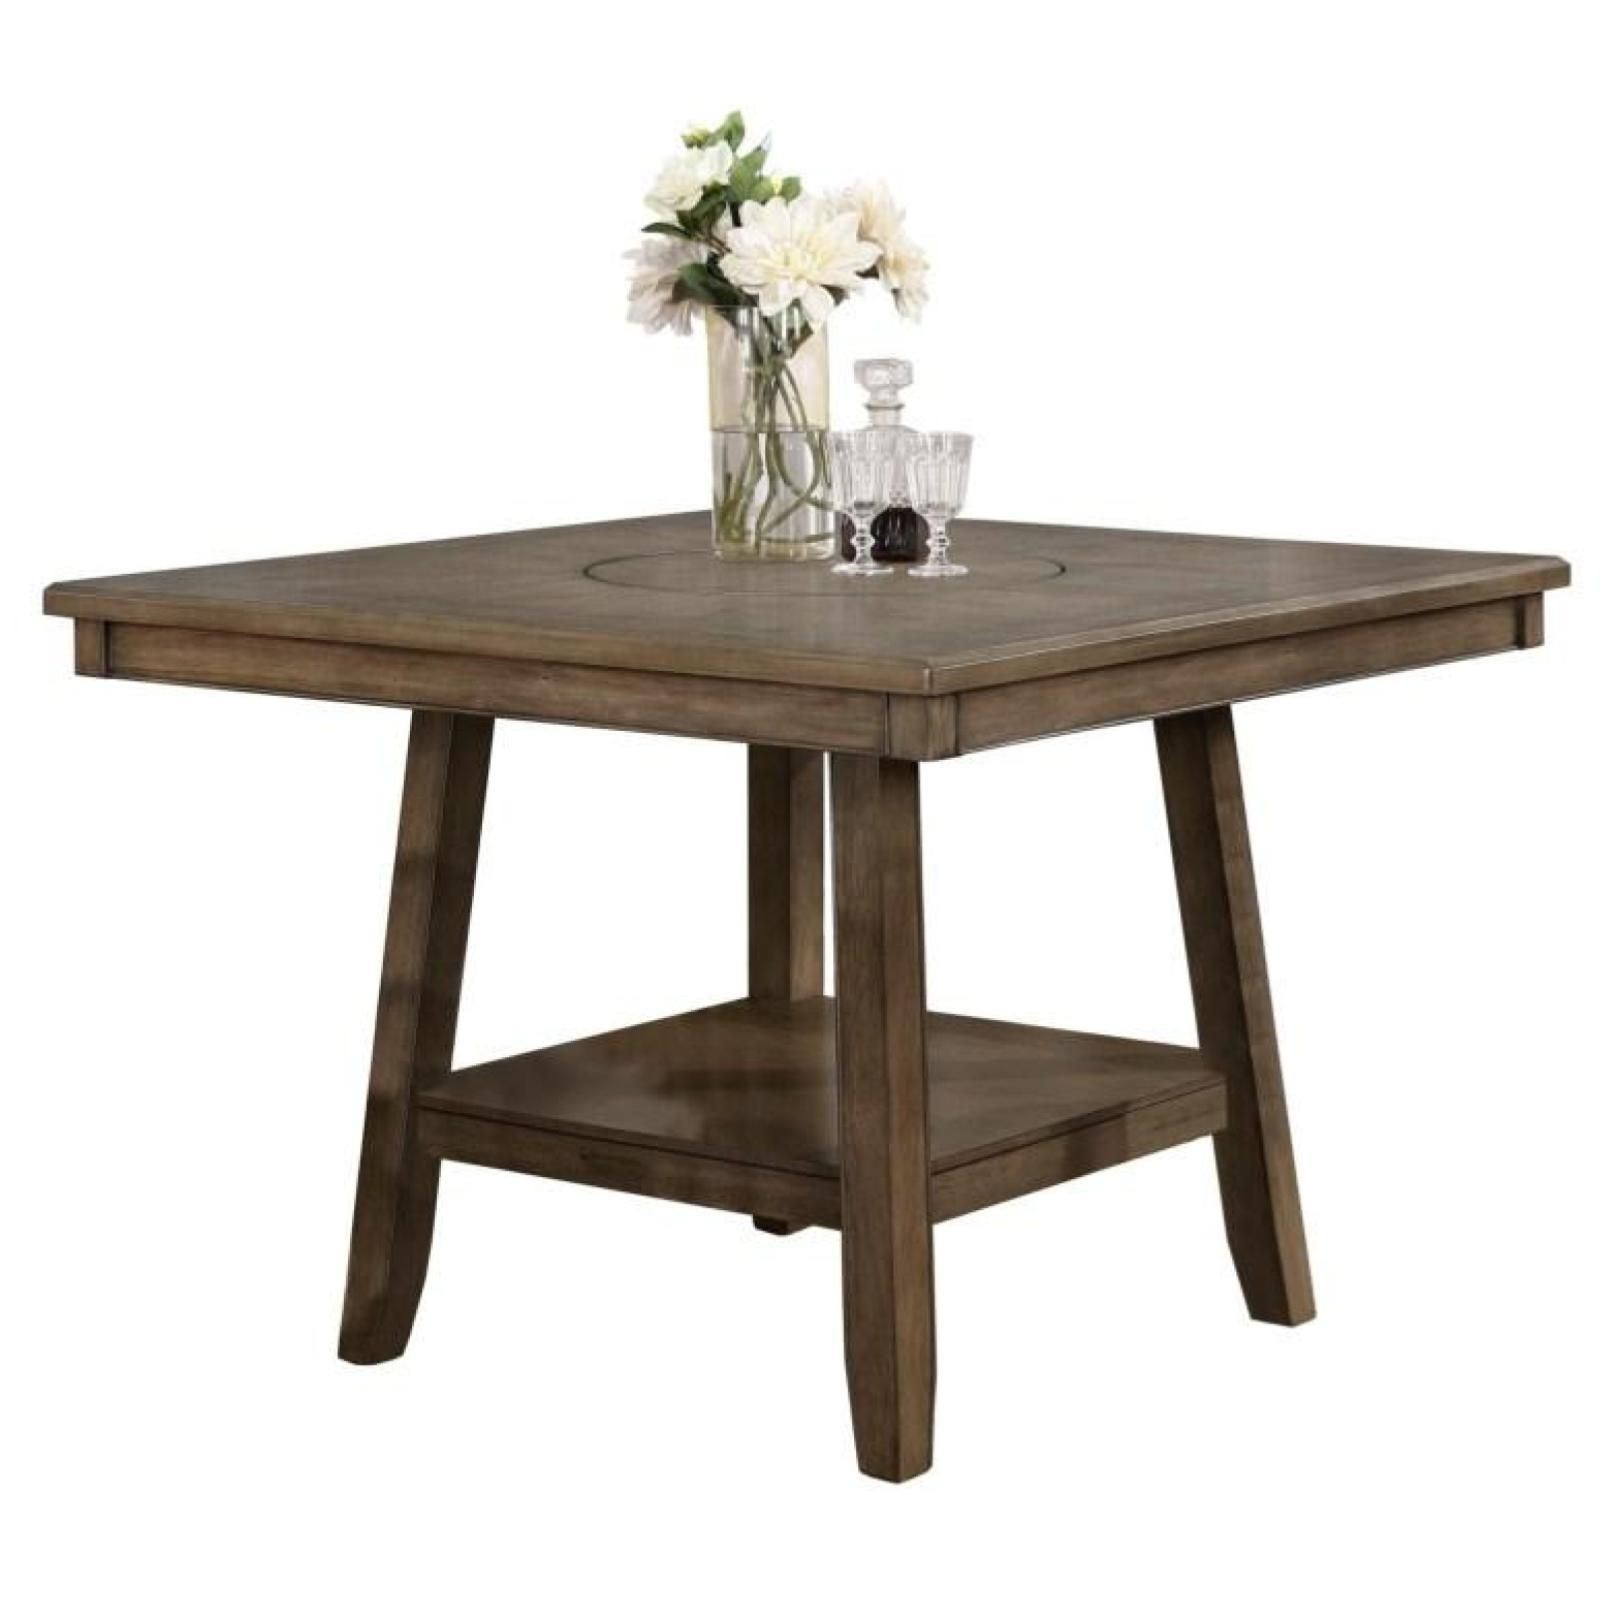 manning counter height dining table woodstock furniture mattress accent ture blue lacquer side small grey modern edmonton with mirror slate coffee brown wicker round nightstand